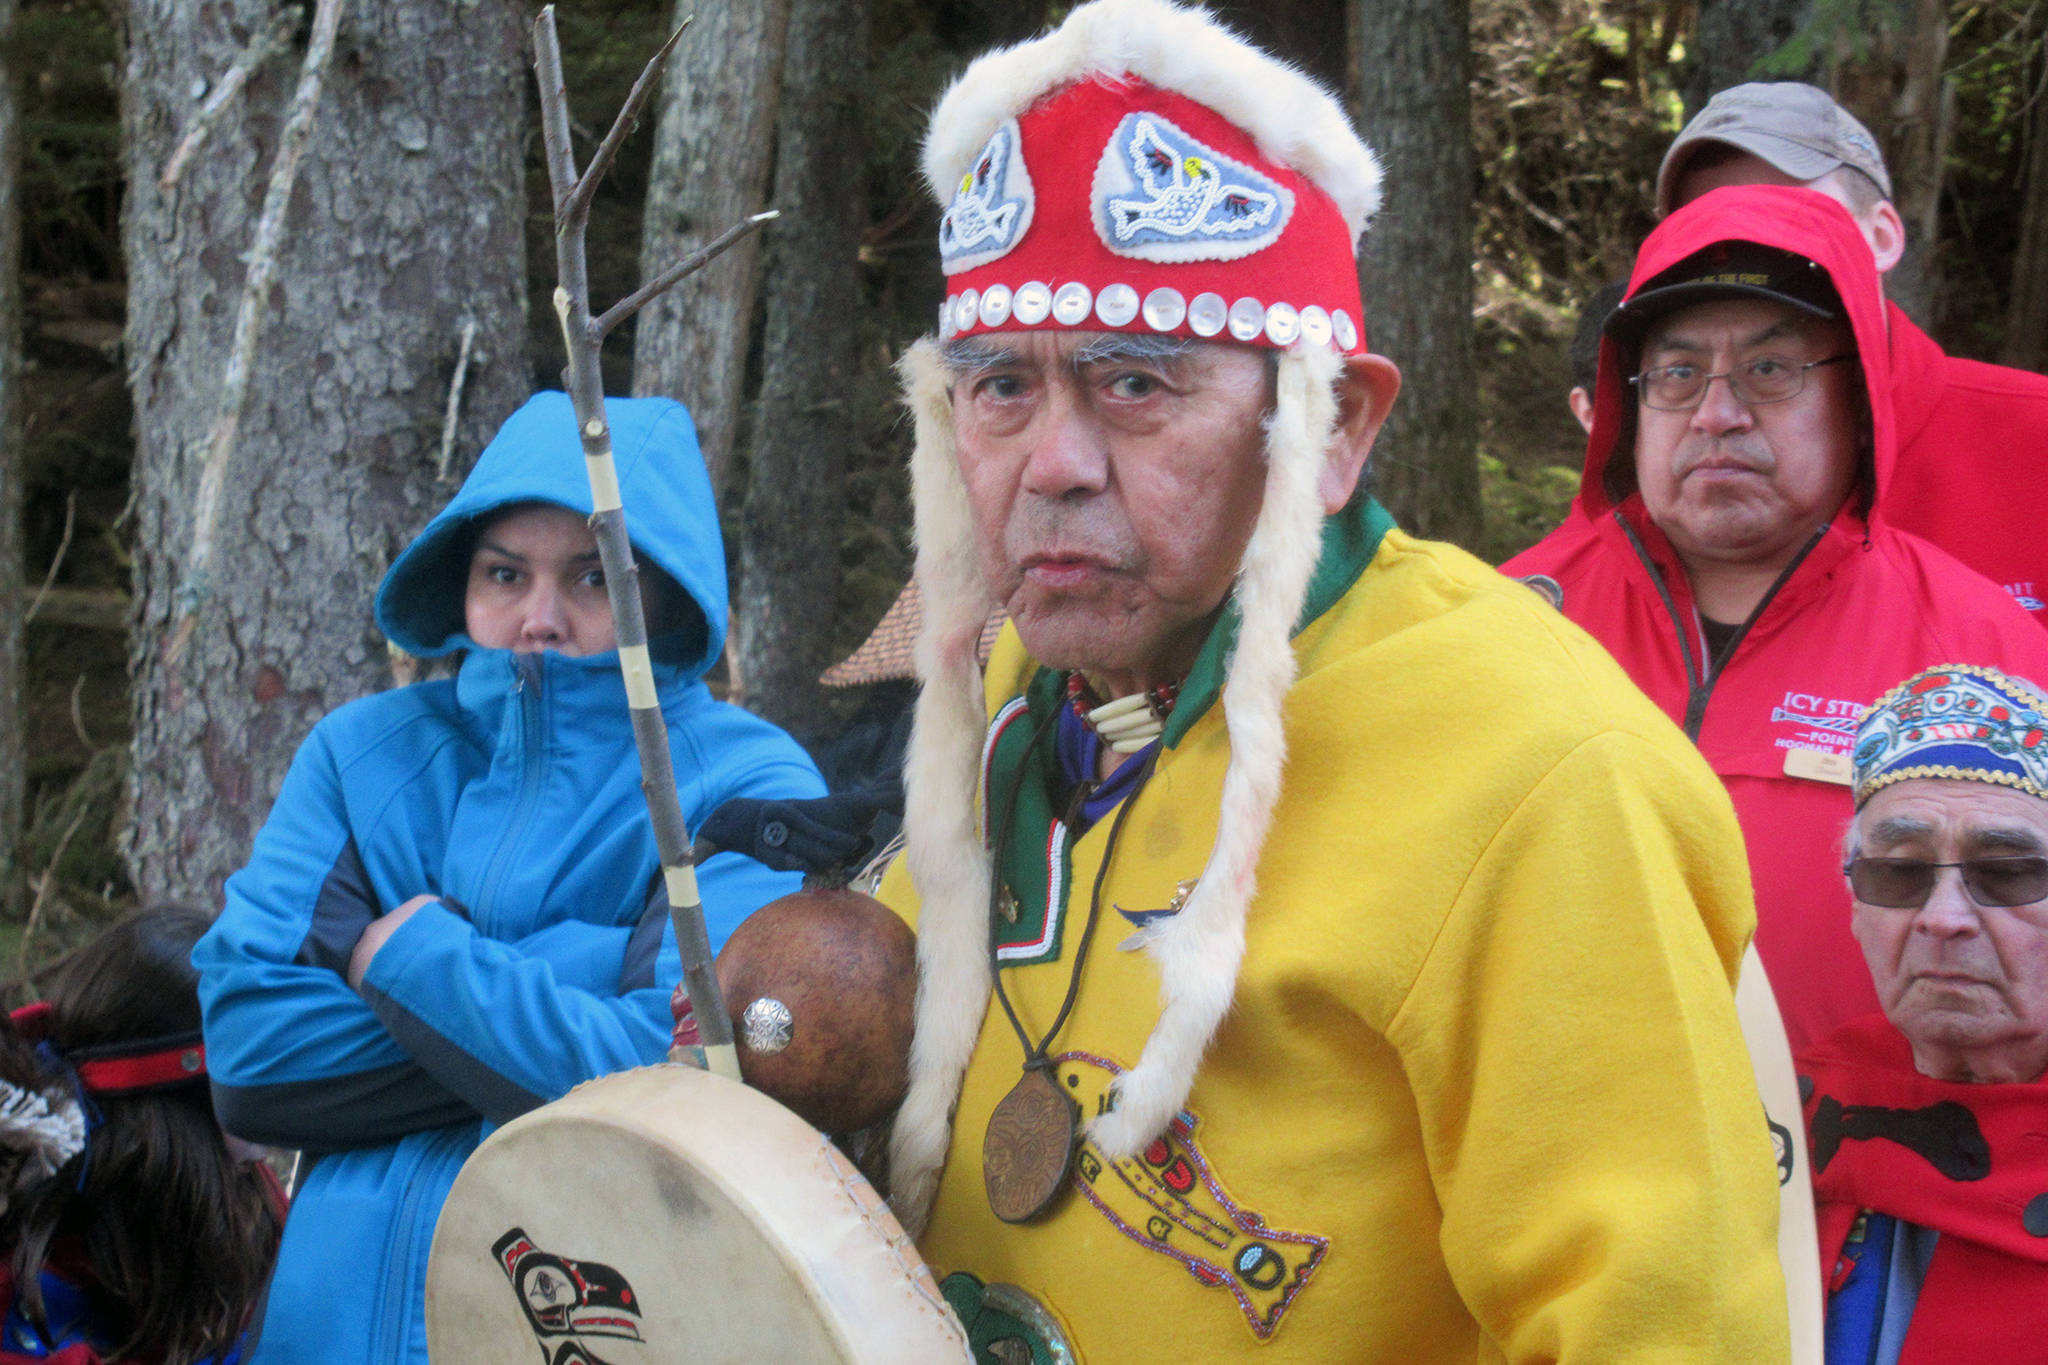 George “Digger” Dalton Jr. stands in regalia during a ground breaking and ground blessing ceremony at the site of a new dock being built at Icy Strait Point near Hoonah, May 1, 2019. (Ben Hohenstatt | Juneau Empire)